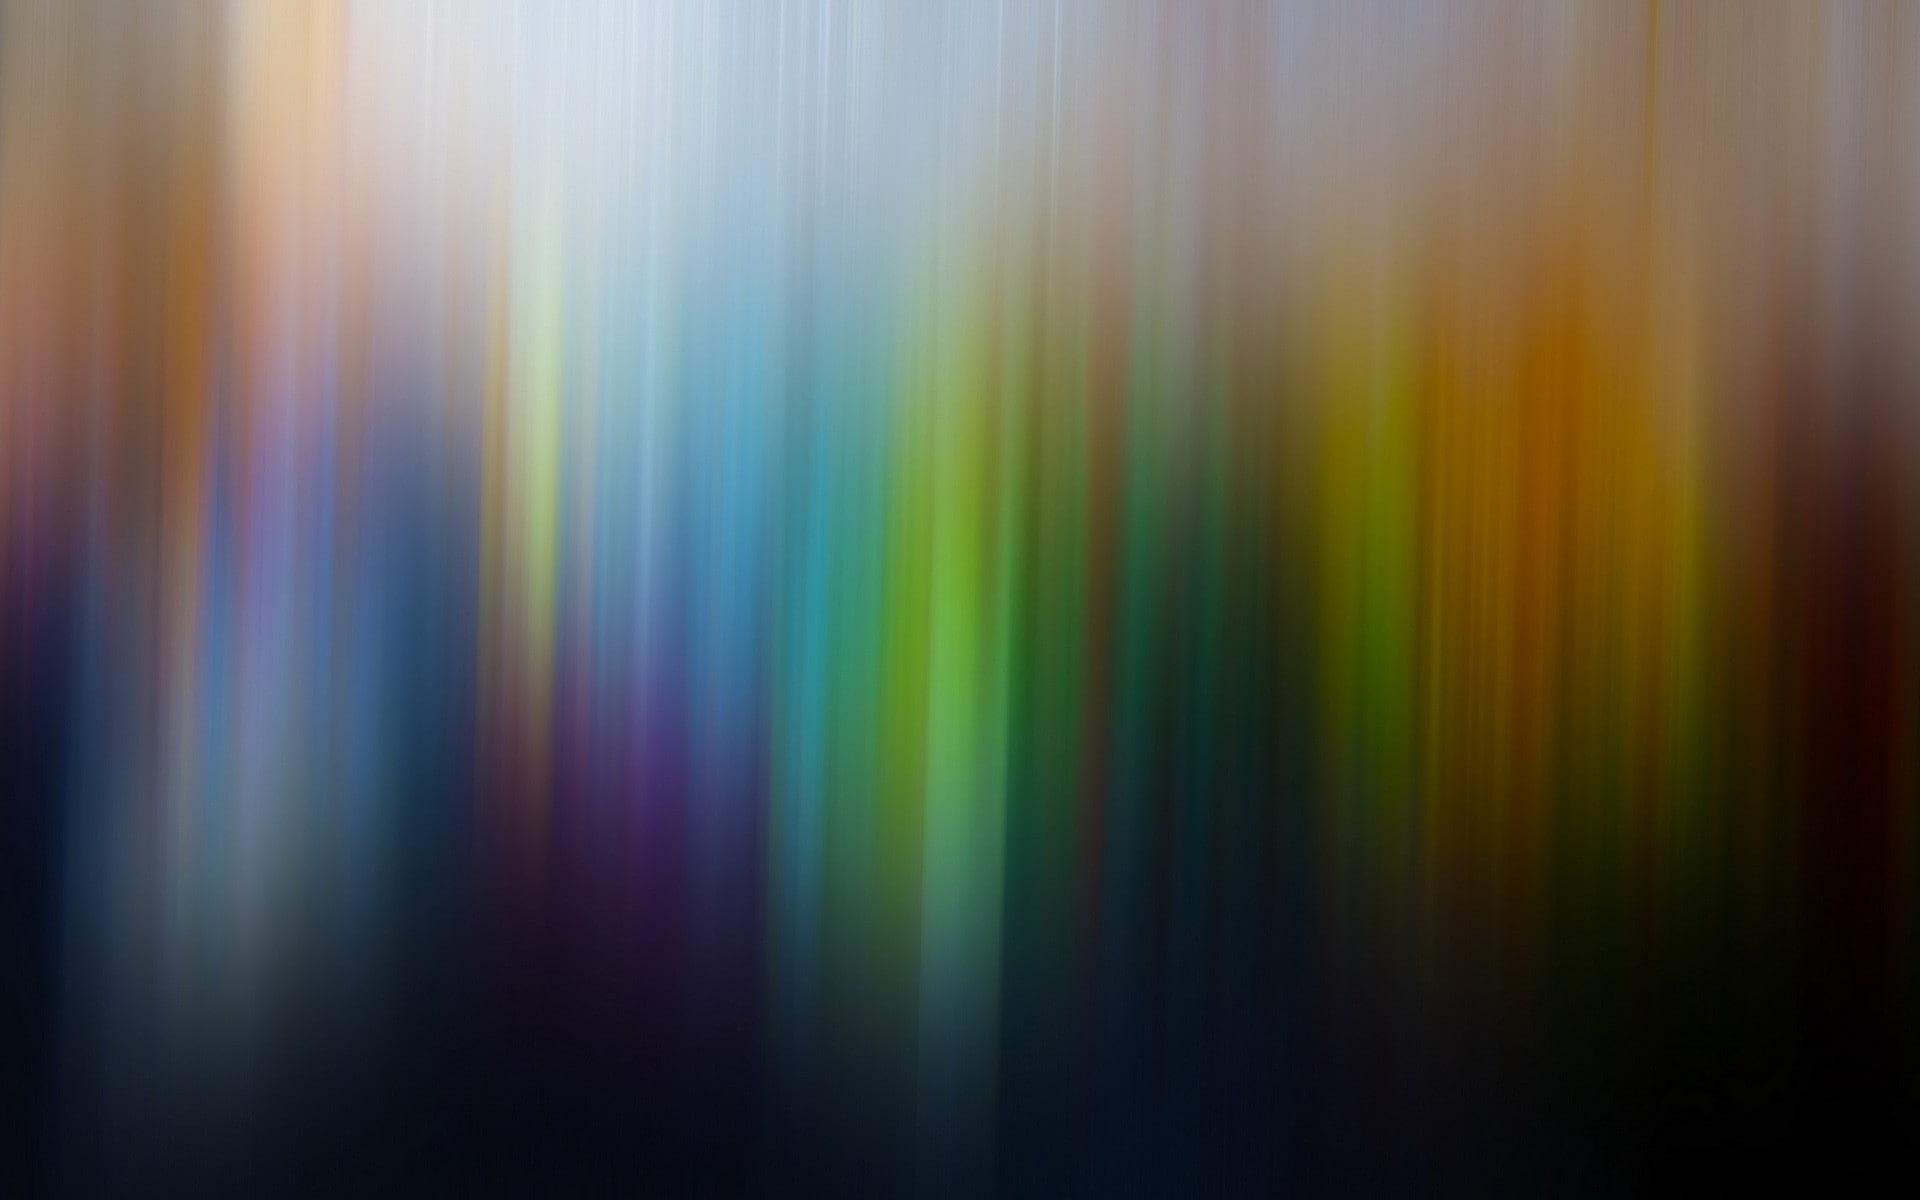 abstract, Primary Colors, multi colored, backgrounds, light - natural phenomenon